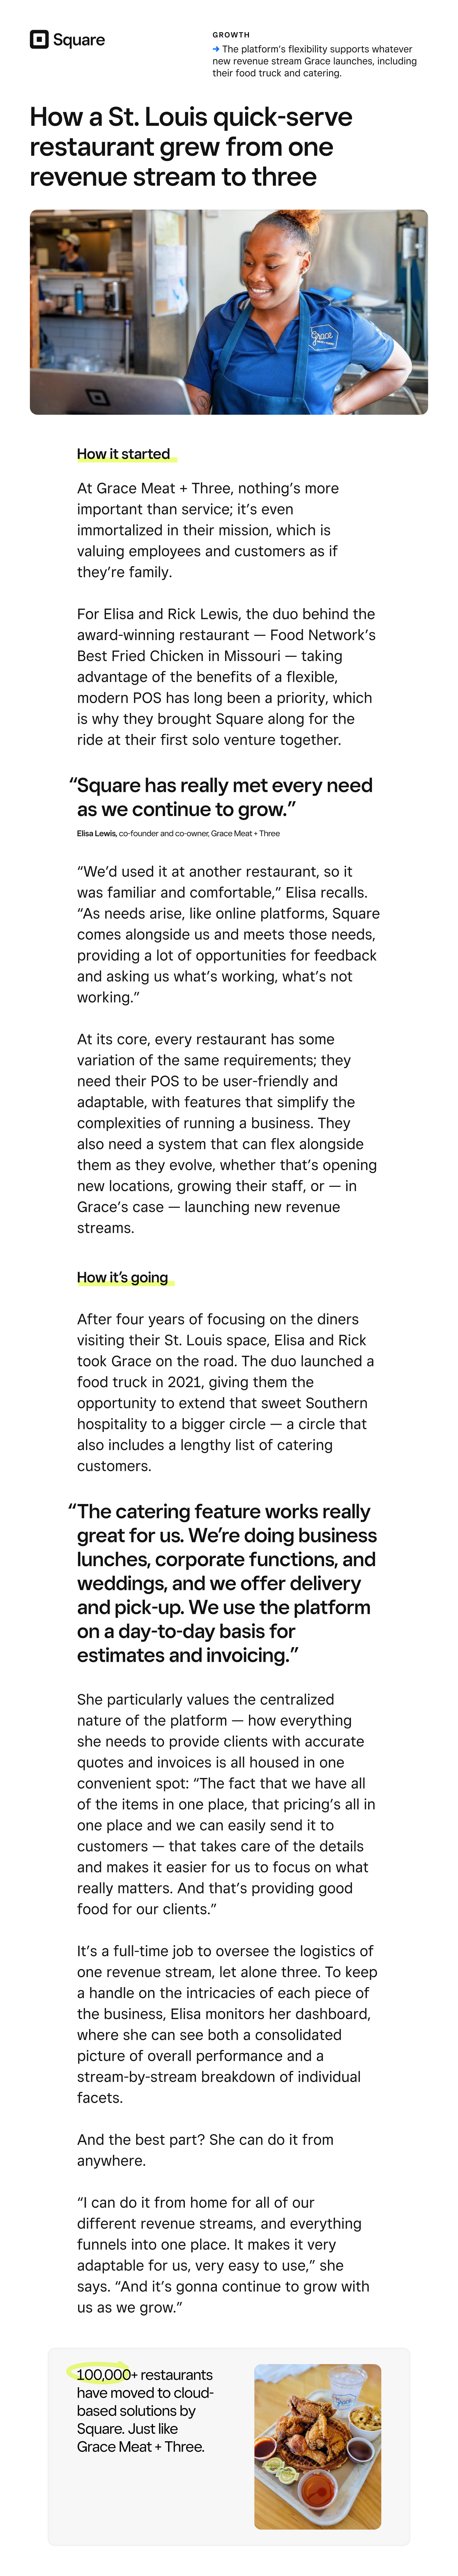 Growth
→ The platform’s flexibility supports whatever new revenue stream Grace launches, including their food truck and catering.
How a St. Louis quick-serve restaurant grew from one revenue stream to three
10 hrs saved 
10% YOY increased revenue
25% online orders boost
How it started
At Grace Meat + Three, nothing’s more important than service; it’s even immortalized in their mission, which is valuing employees and customers as if they’re family.

For Elisa and Rick Lewis, the duo behind the award-winning restaurant — Food Network’s Best Fried Chicken in Missouri — taking advantage of the benefits of a flexible, modern POS has long been a priority, which is why they brought Square along for the ride at their first solo venture together.
“Square has really met every need as we continue to grow.”
Elisa Lewis, co-founder and co-owner, Grace Meat + Three
“We’d used it at another restaurant, so it was familiar and comfortable,” Elisa recalls. “As needs arise, like online platforms, Square comes alongside us and meets those needs, providing a lot of opportunities for feedback and asking us what’s working, what’s not working.”

At its core, every restaurant has some variation of the same requirements; they need their POS to be user-friendly and adaptable, with features that simplify the complexities of running a business. They also need a system that can flex alongside them as they evolve, whether that’s opening new locations, growing their staff, or — in Grace’s case — launching new revenue streams.
How it’s going
After four years of focusing on the diners visiting their St. Louis space, Elisa and Rick took Grace on the road. The duo launched a food truck in 2021, giving them the opportunity to extend that sweet Southern hospitality to a bigger circle — a circle that also includes a lengthy list of catering customers.
“The catering feature works really great for us. We’re doing business lunches, corporate functions, and weddings, and we offer delivery and pick-up. We use the platform on a day-to-day basis for estimates and invoicing.”
Vern Thomas, founder, owner, and executive chef,  
Virgin Island Thyme Caribbean Grille
She particularly values the centralized nature of the platform — how everything she needs to provide clients with accurate quotes and invoices is all housed in one convenient spot: “The fact that we have all of the items in one place, that pricing’s all in one place and we can easily send it to customers — that takes care of the details and makes it easier for us to focus on what really matters. And that’s providing good food for our clients.”

It’s a full-time job to oversee the logistics of one revenue stream, let alone three. To keep a handle on the intricacies of each piece of the business, Elisa monitors her dashboard, where she can see both a consolidated picture of overall performance and a stream-by-stream breakdown of individual facets.

And the best part? She can do it from anywhere.

“I can do it from home for all of our different revenue streams, and everything funnels into one place. It makes it very adaptable for us, very easy to use,” she says. “And it’s gonna continue to grow with us as we grow.”

100,000+ restaurants have moved to cloud-based solutions by Square. Just like Grace Meat + Three. 